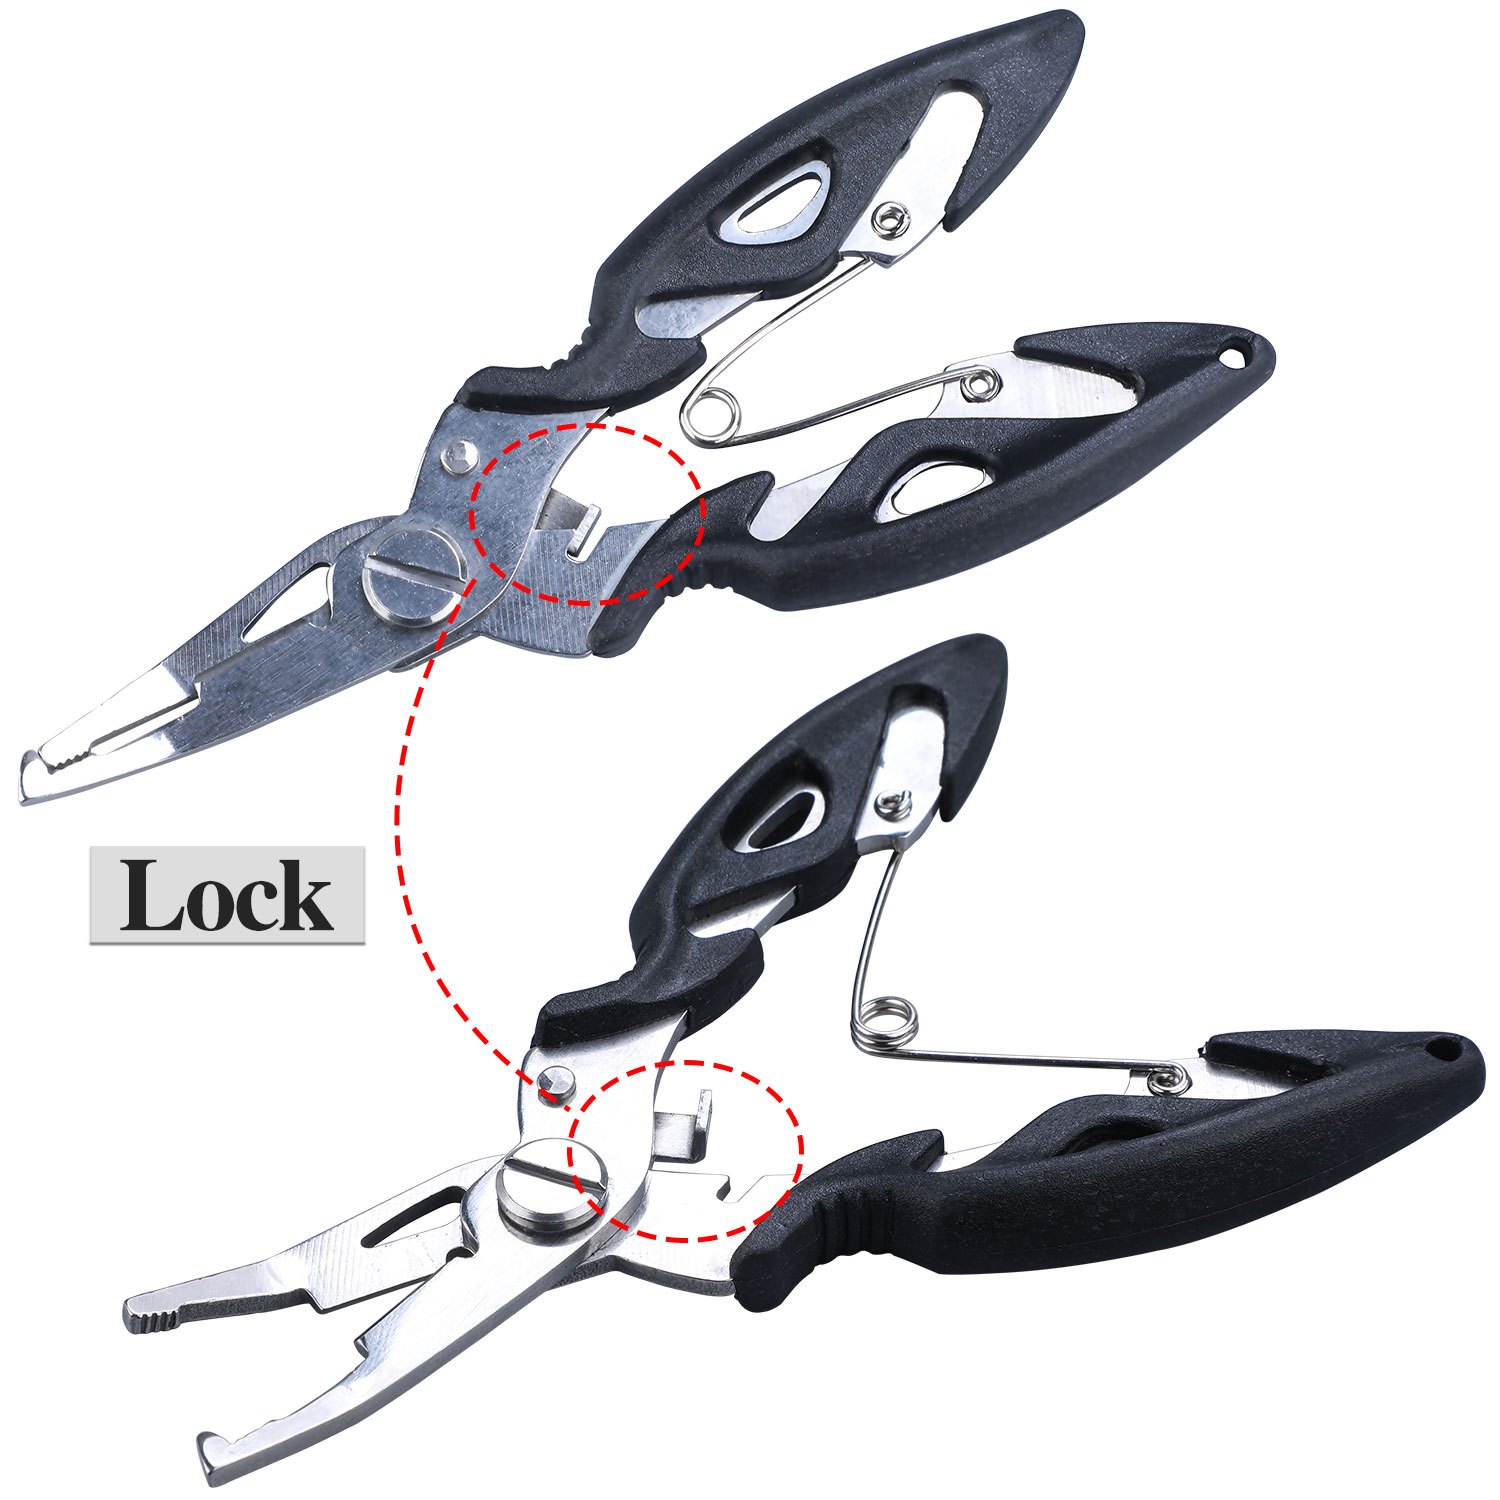 Fishing Tool Kit Aluminum Fish Hook Remover Muti Function Stainless Steel Fishing  Pliers Fish Lip Gripper With Pliers Sheath 240108 From Huo06, $17.4